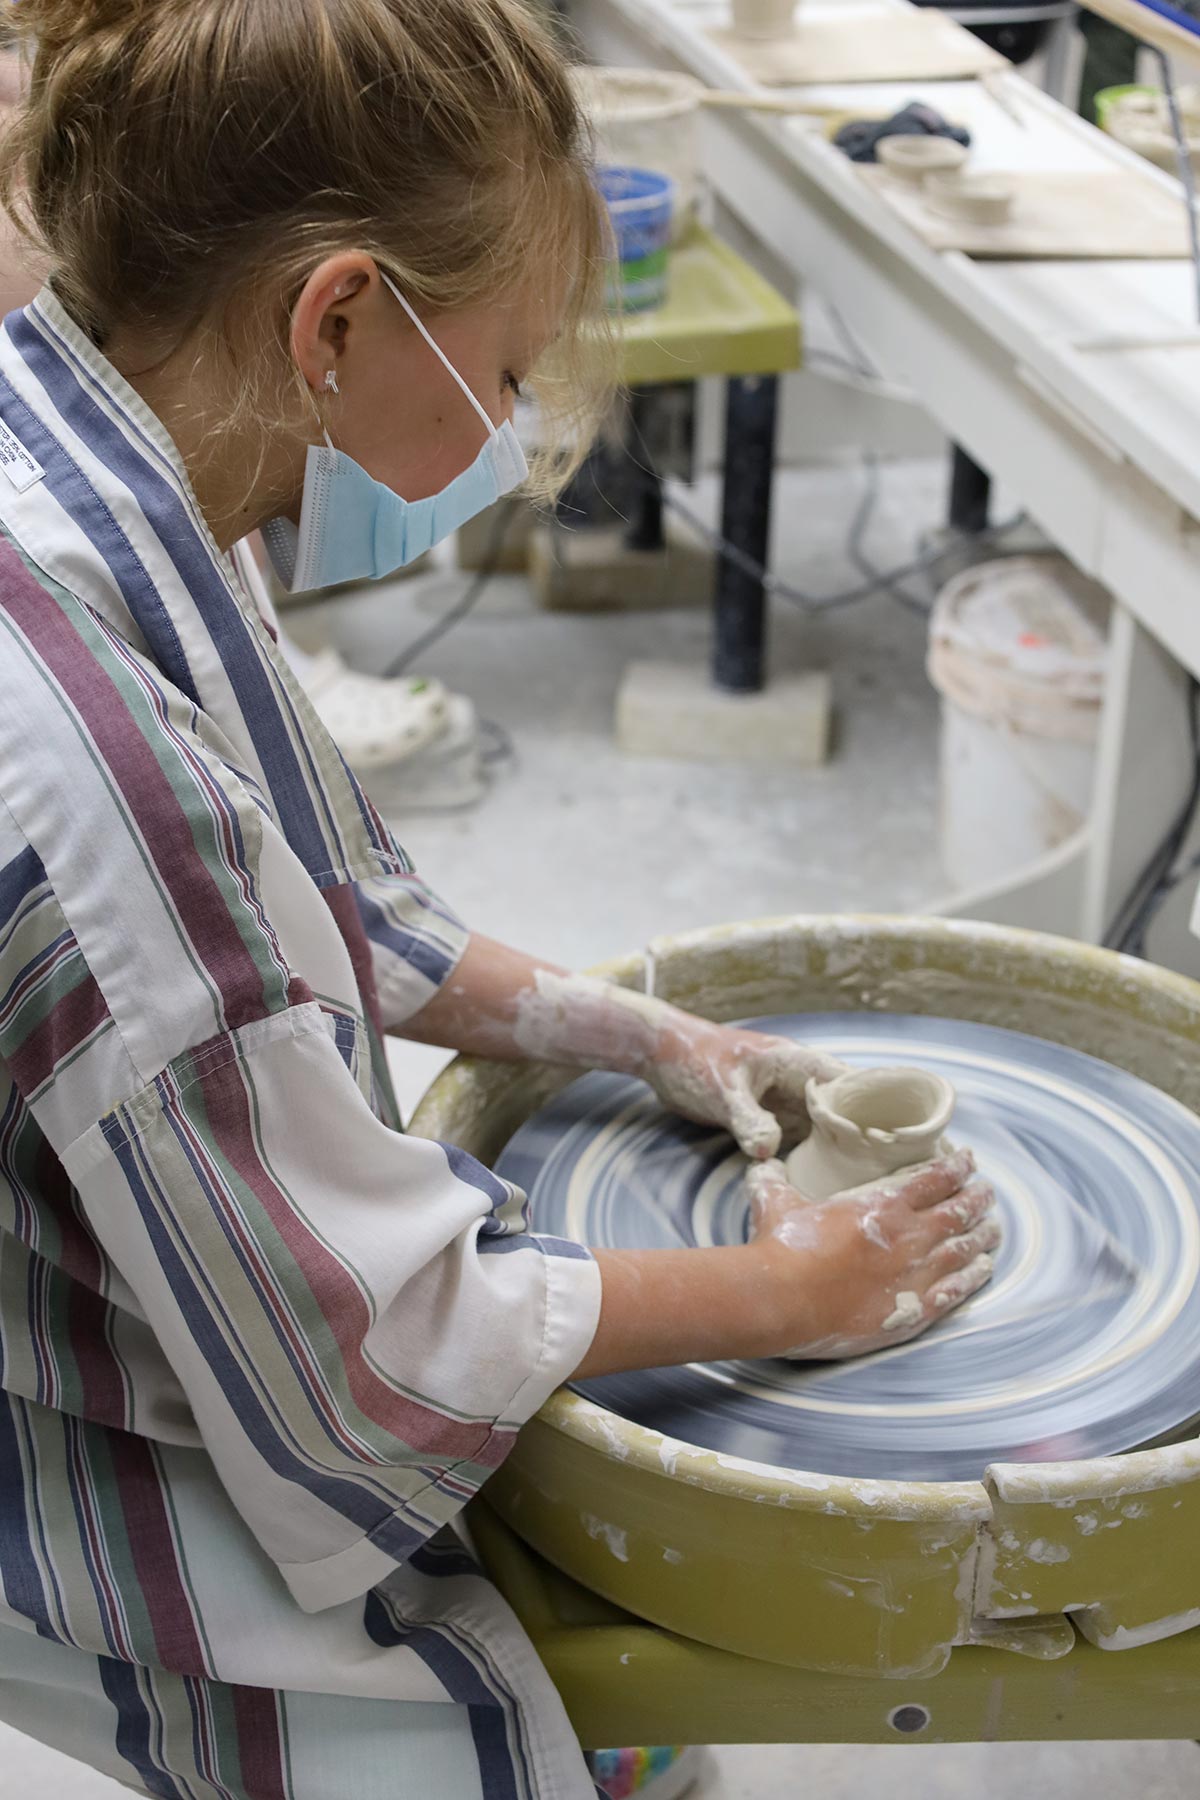 Masked girl wearing a smock while forming a vessel on a potter's wheel